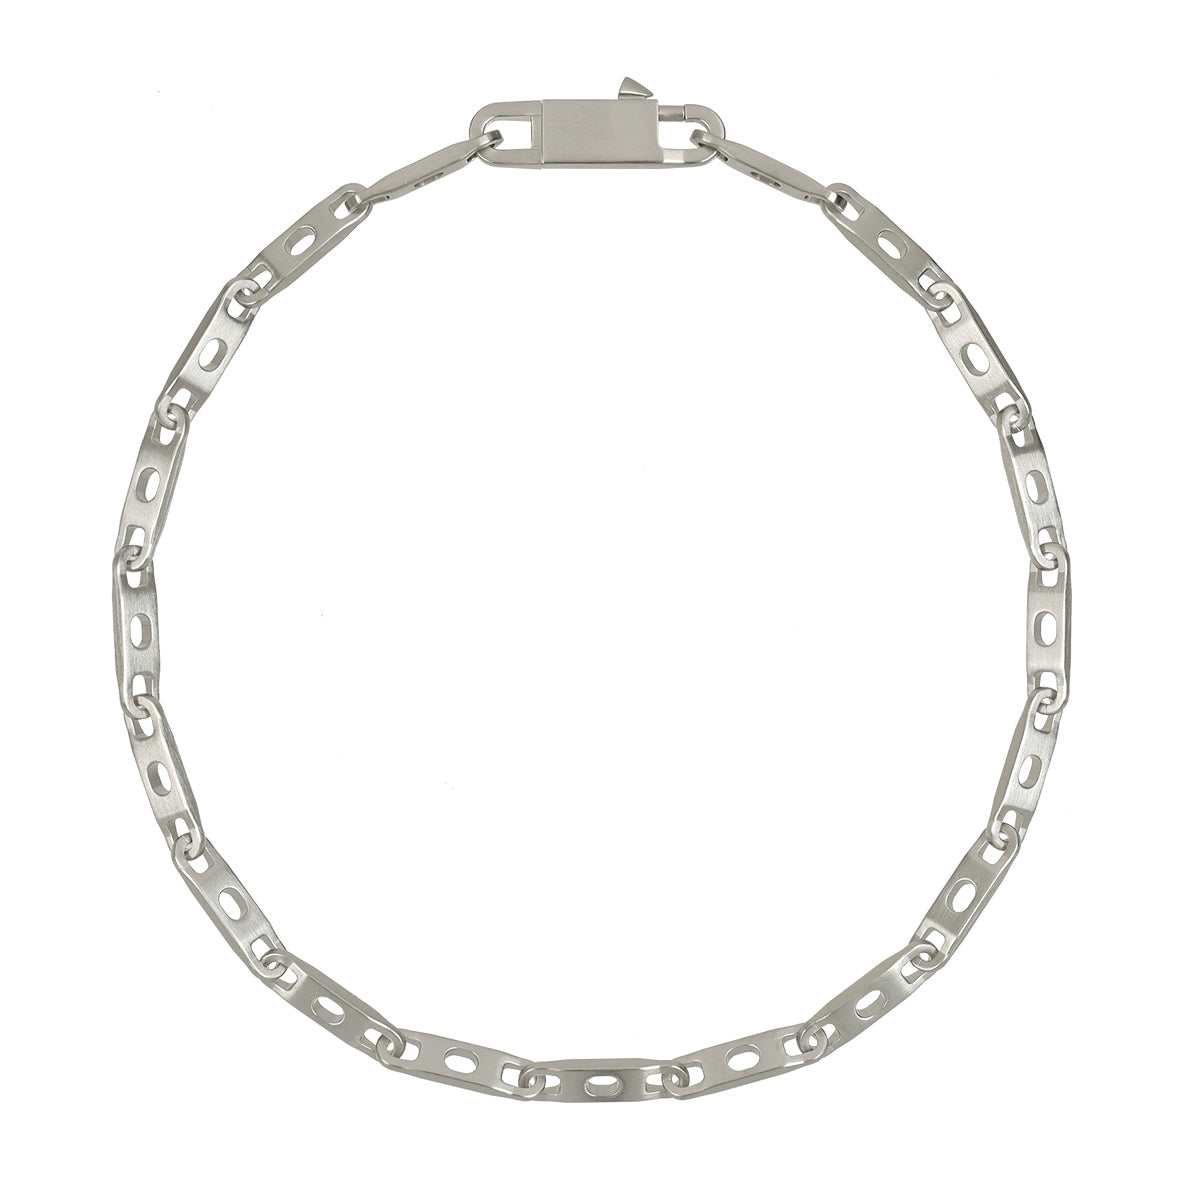 RICK OWENS (リック・オウエンス) - CHAIN NECKLACE ネックレス 